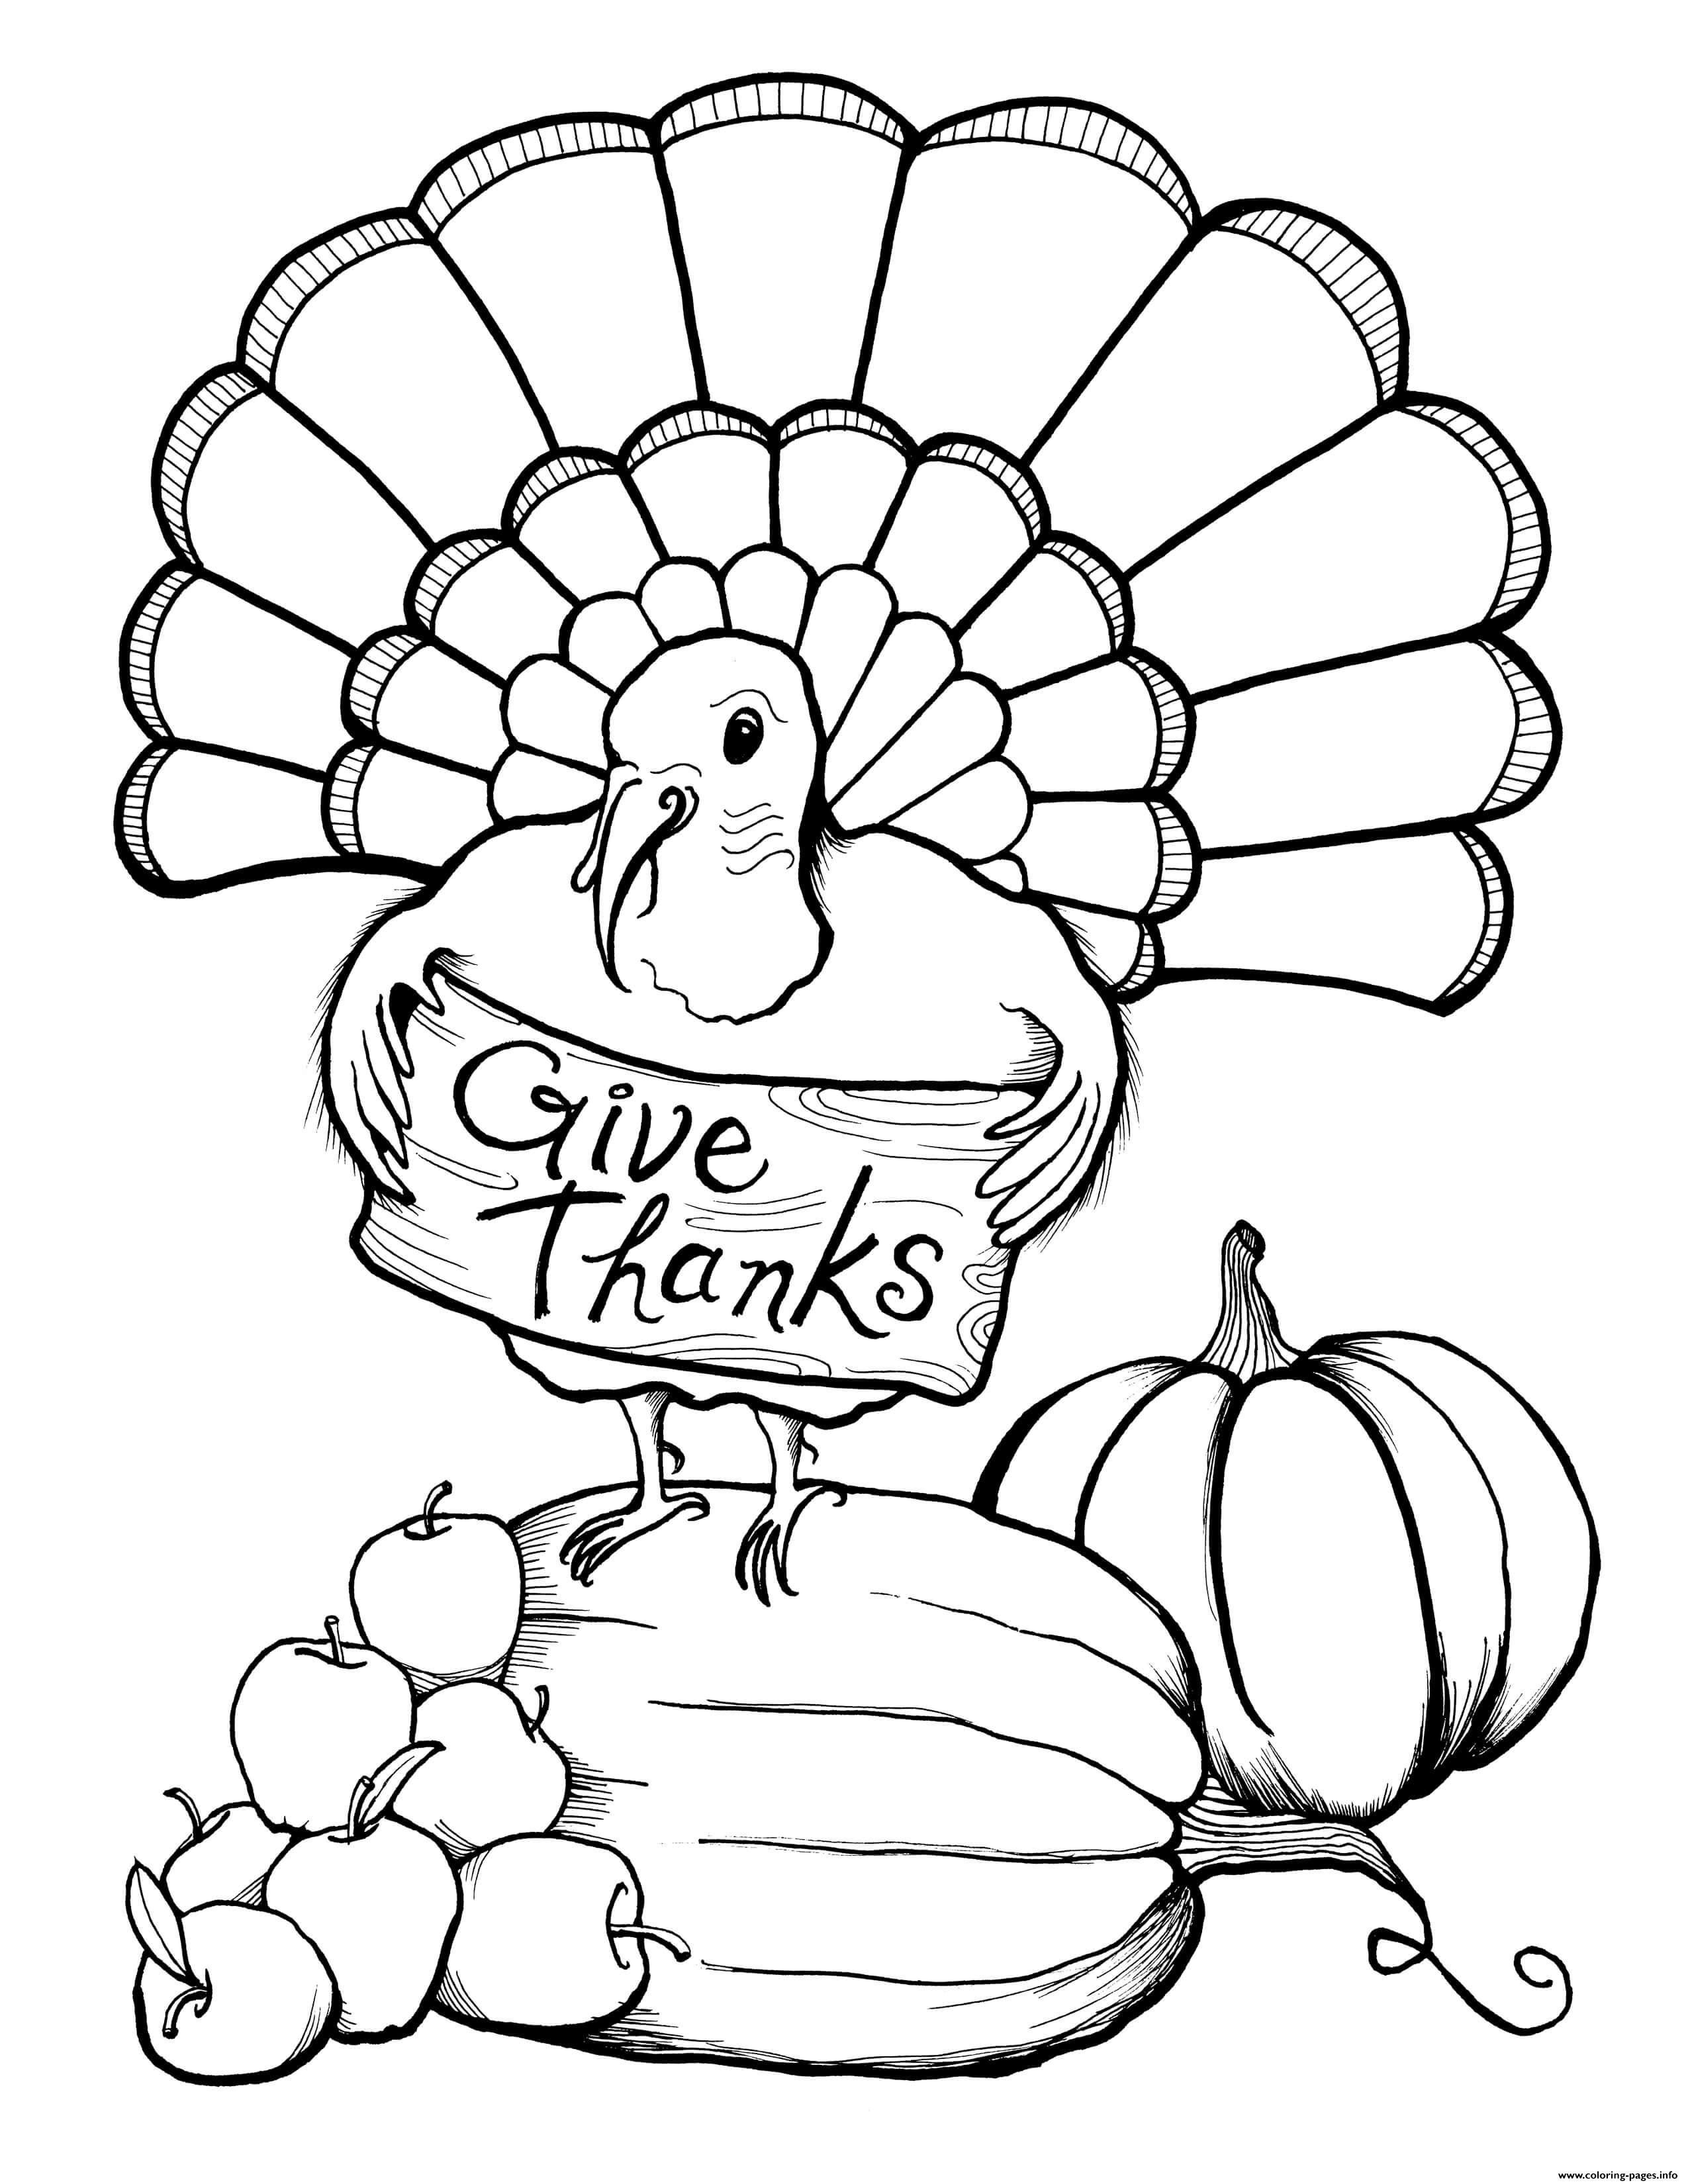 Adult Thanksgiving Turkey Give Thanks Coloring Page Printable